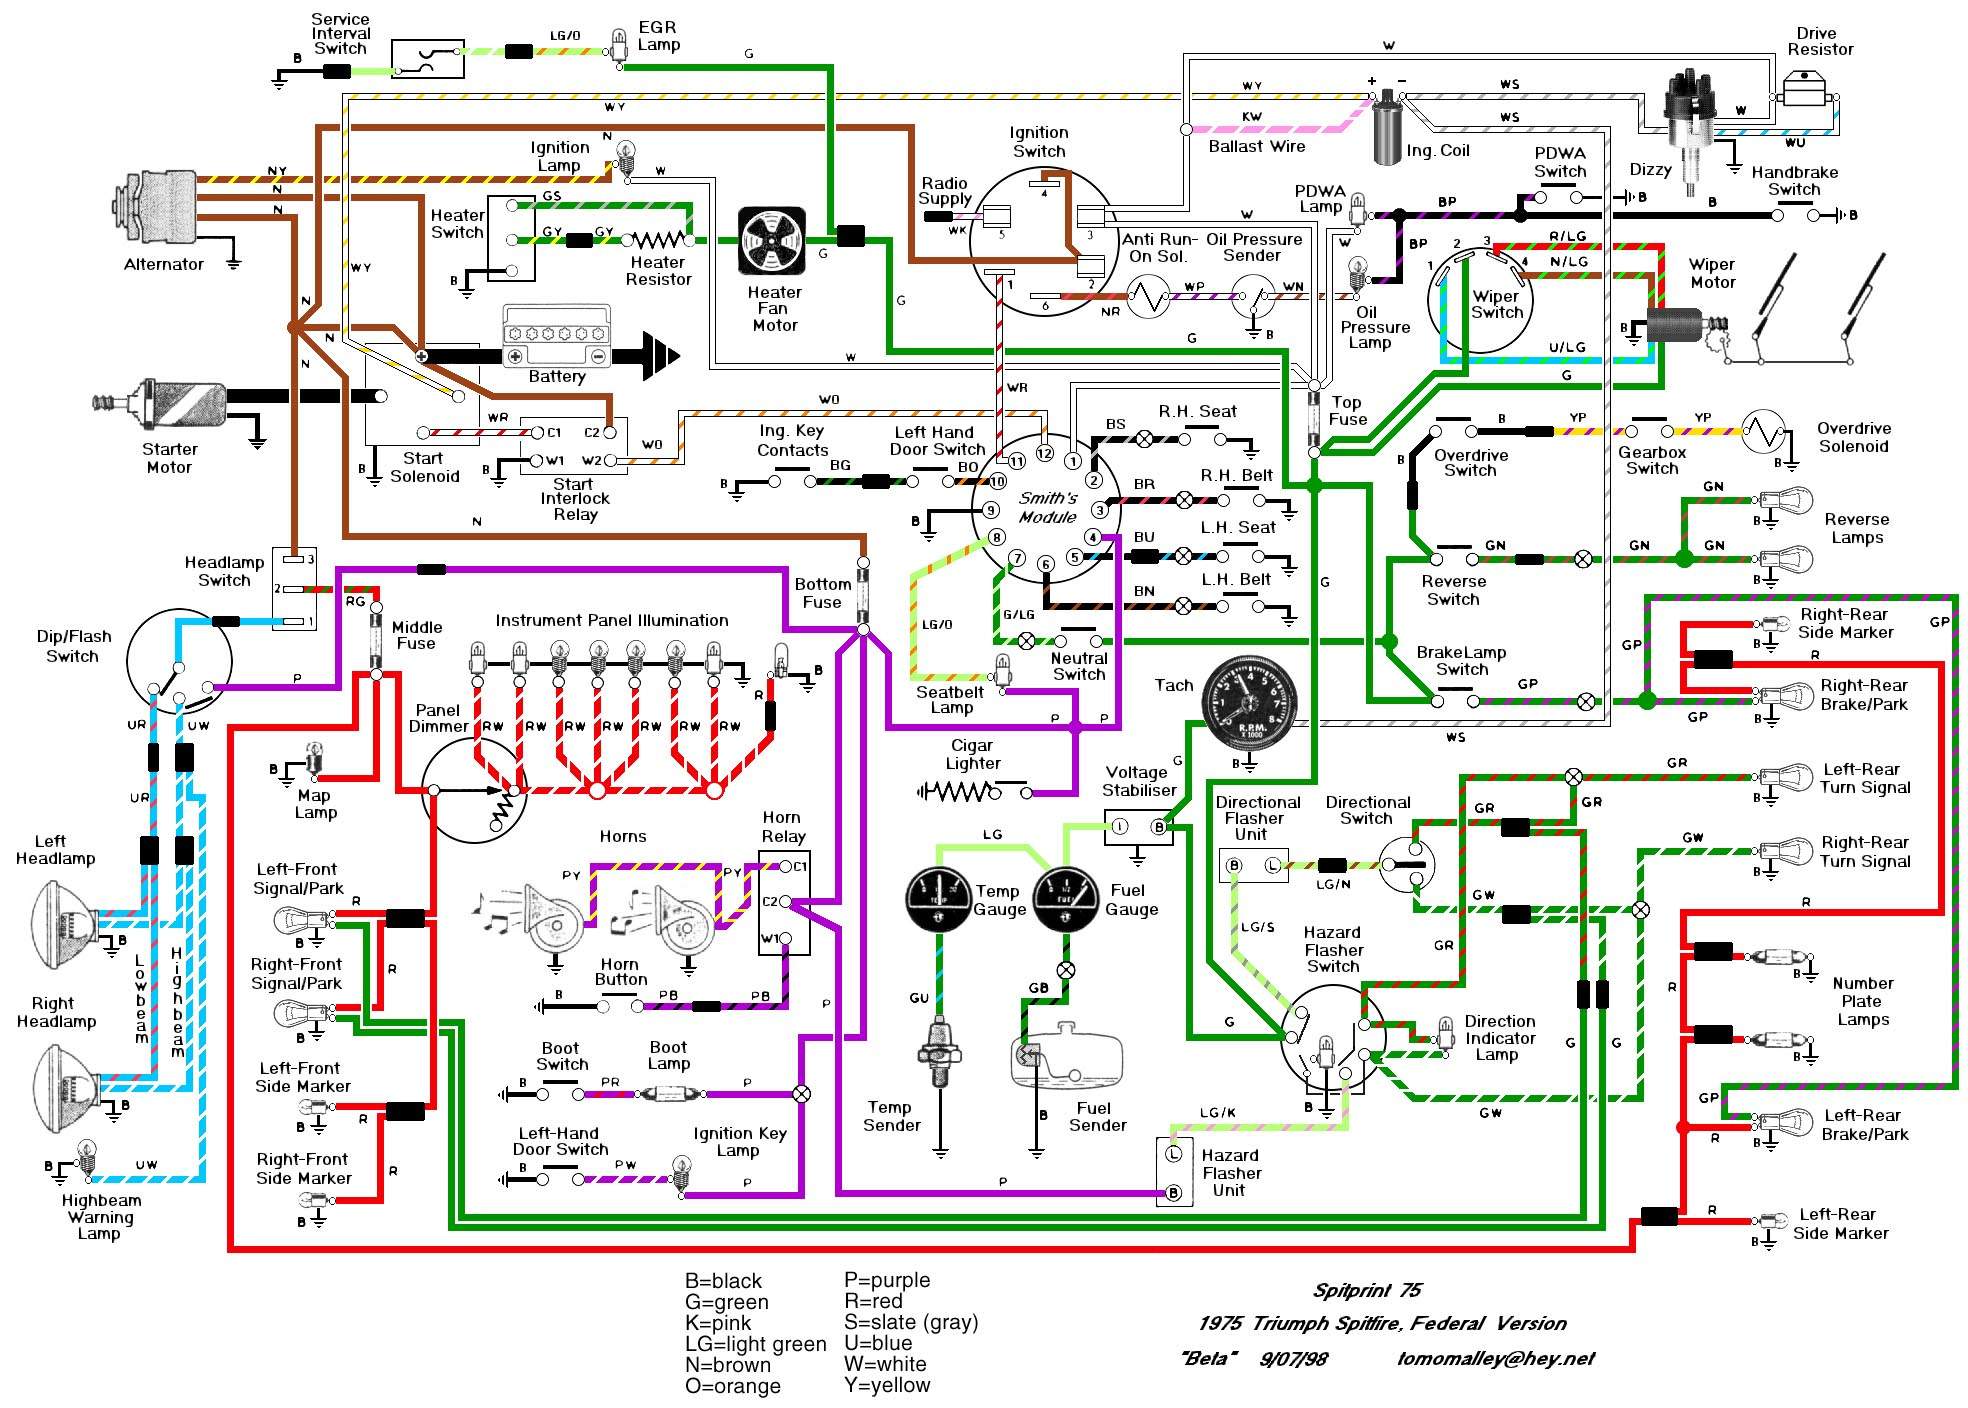 Wiring Diagram For A Car - Wiring Diagram Detailed - Automobile Wiring Diagram